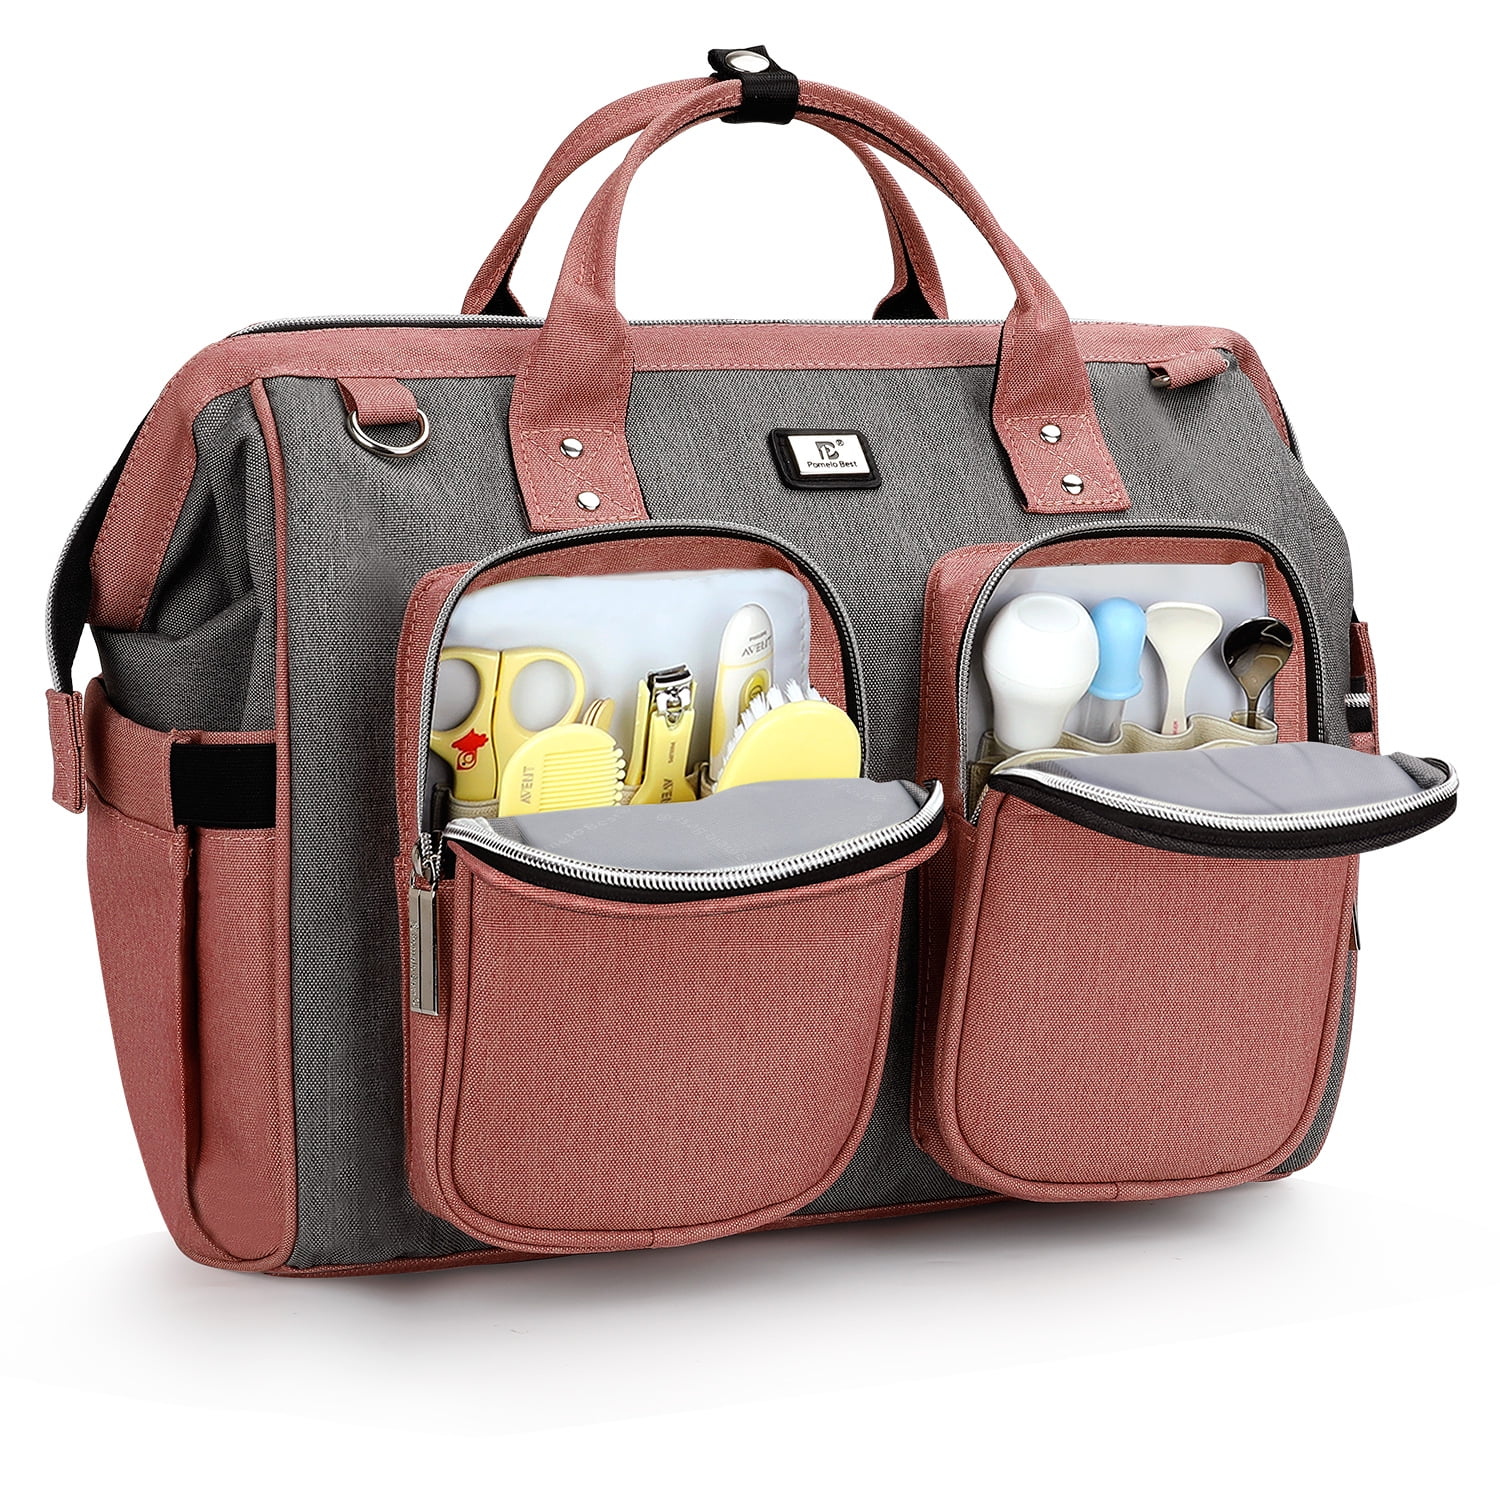 Multi Functional PU Leather Diaper Best Diaper Bag Backpack With Changing  Pad, Stroller Straps, Insulation Bag, Andurse Ideal For Travel And  Maternity Needs From Bai09, $60.89 | DHgate.Com